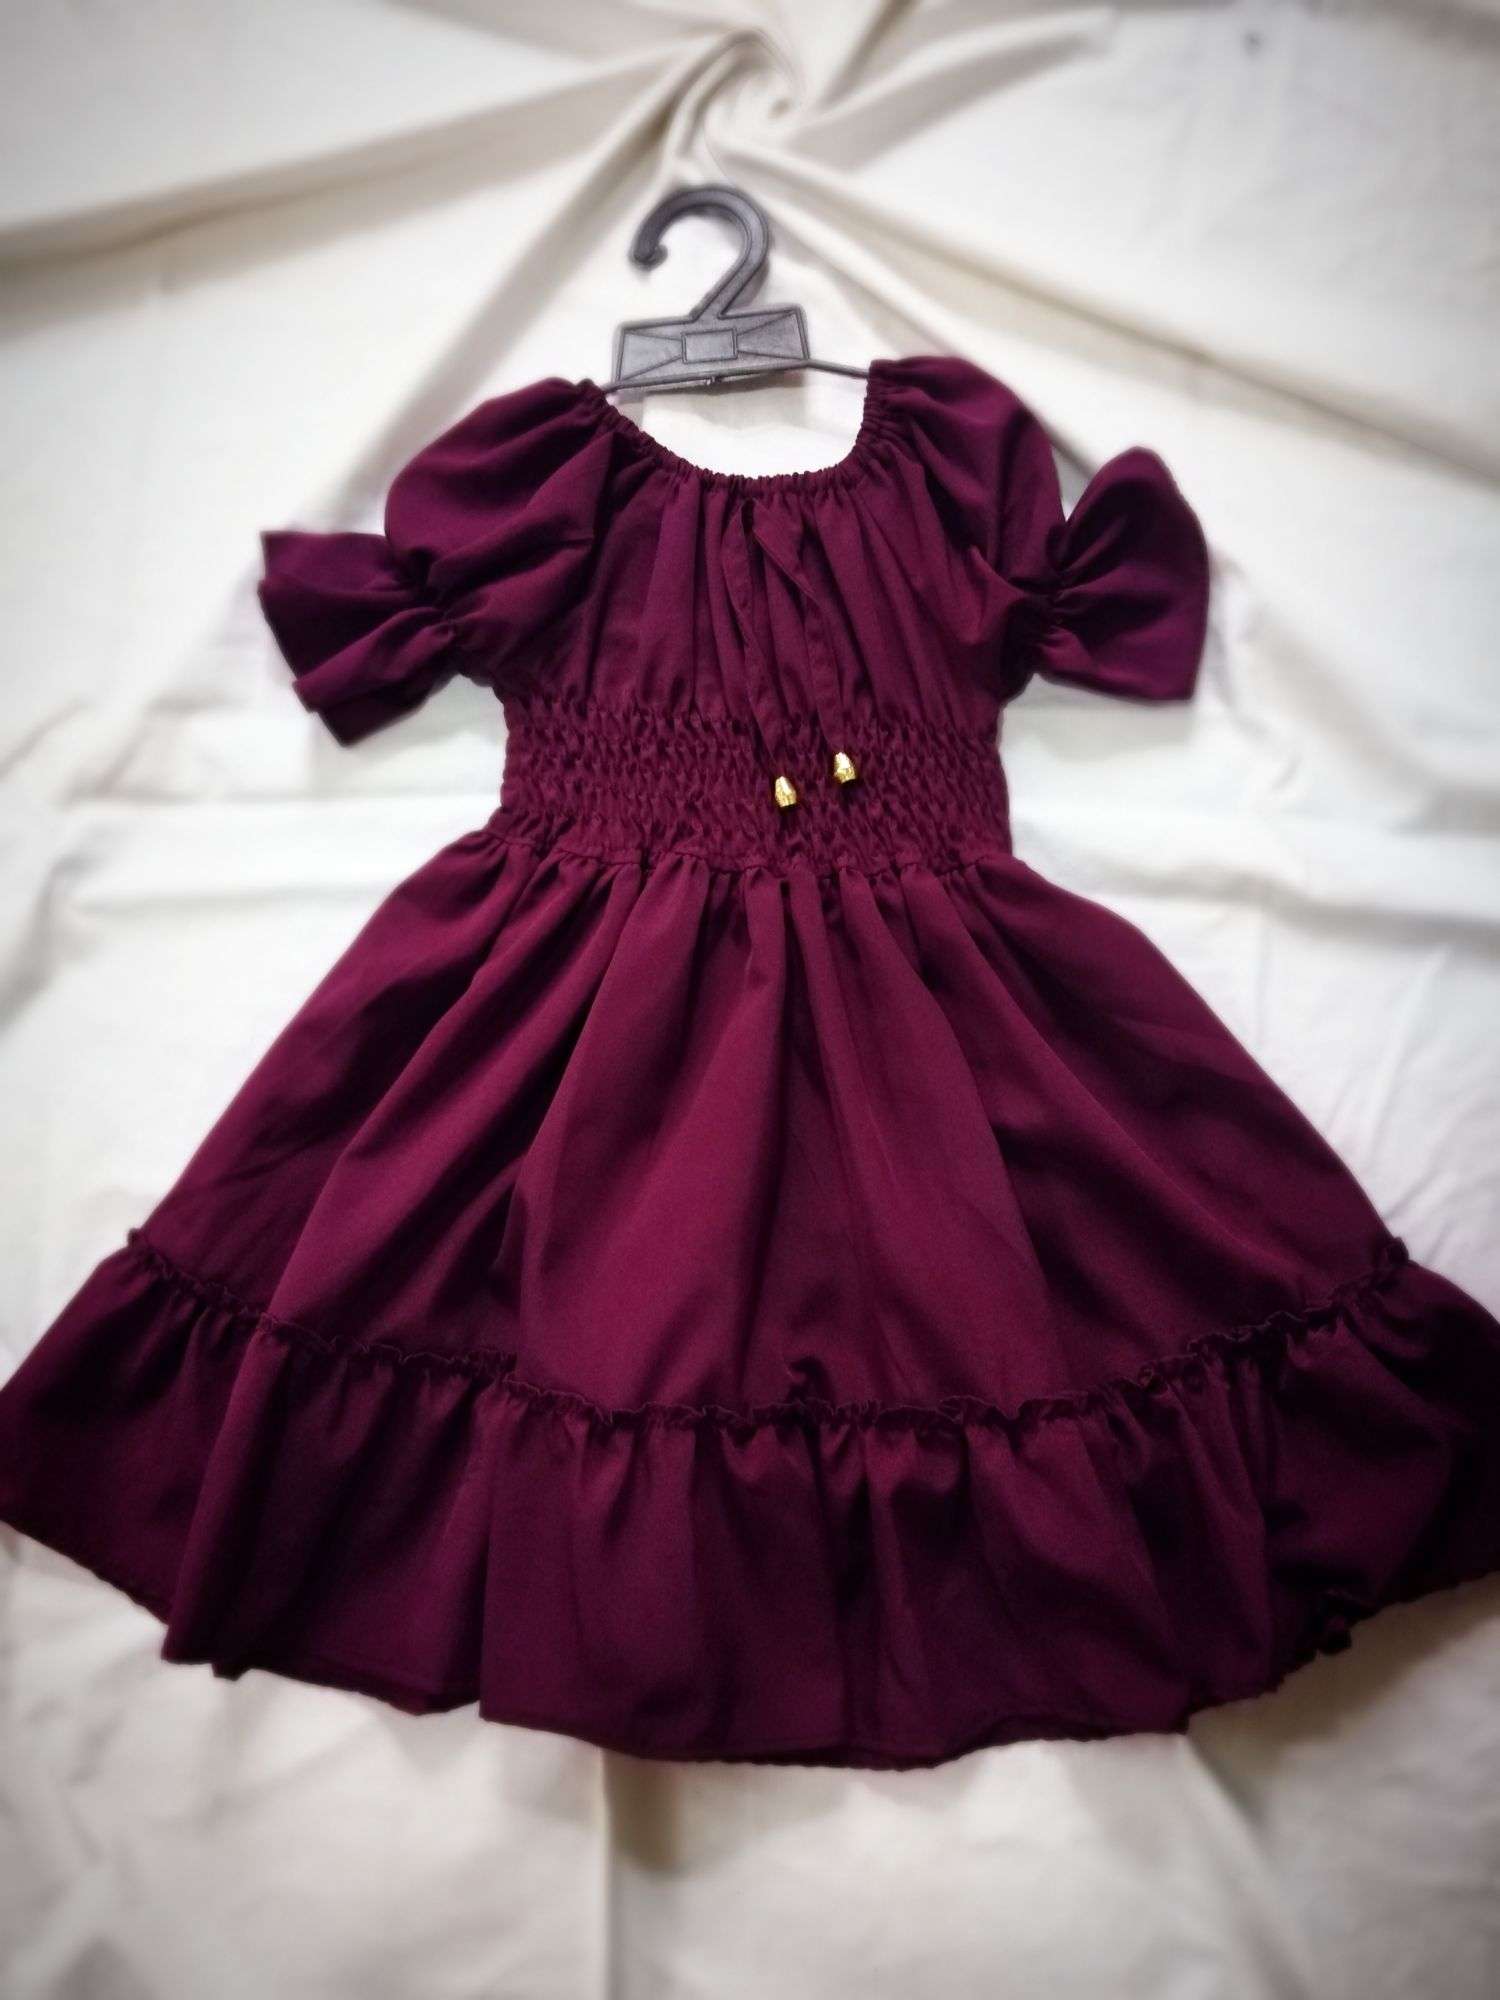 Elegant Summer Girls Party Dresses For Teen Girls With Bowknot Back And Bag  Sizes 5 13 230320 From Kong06, $14.89 | DHgate.Com